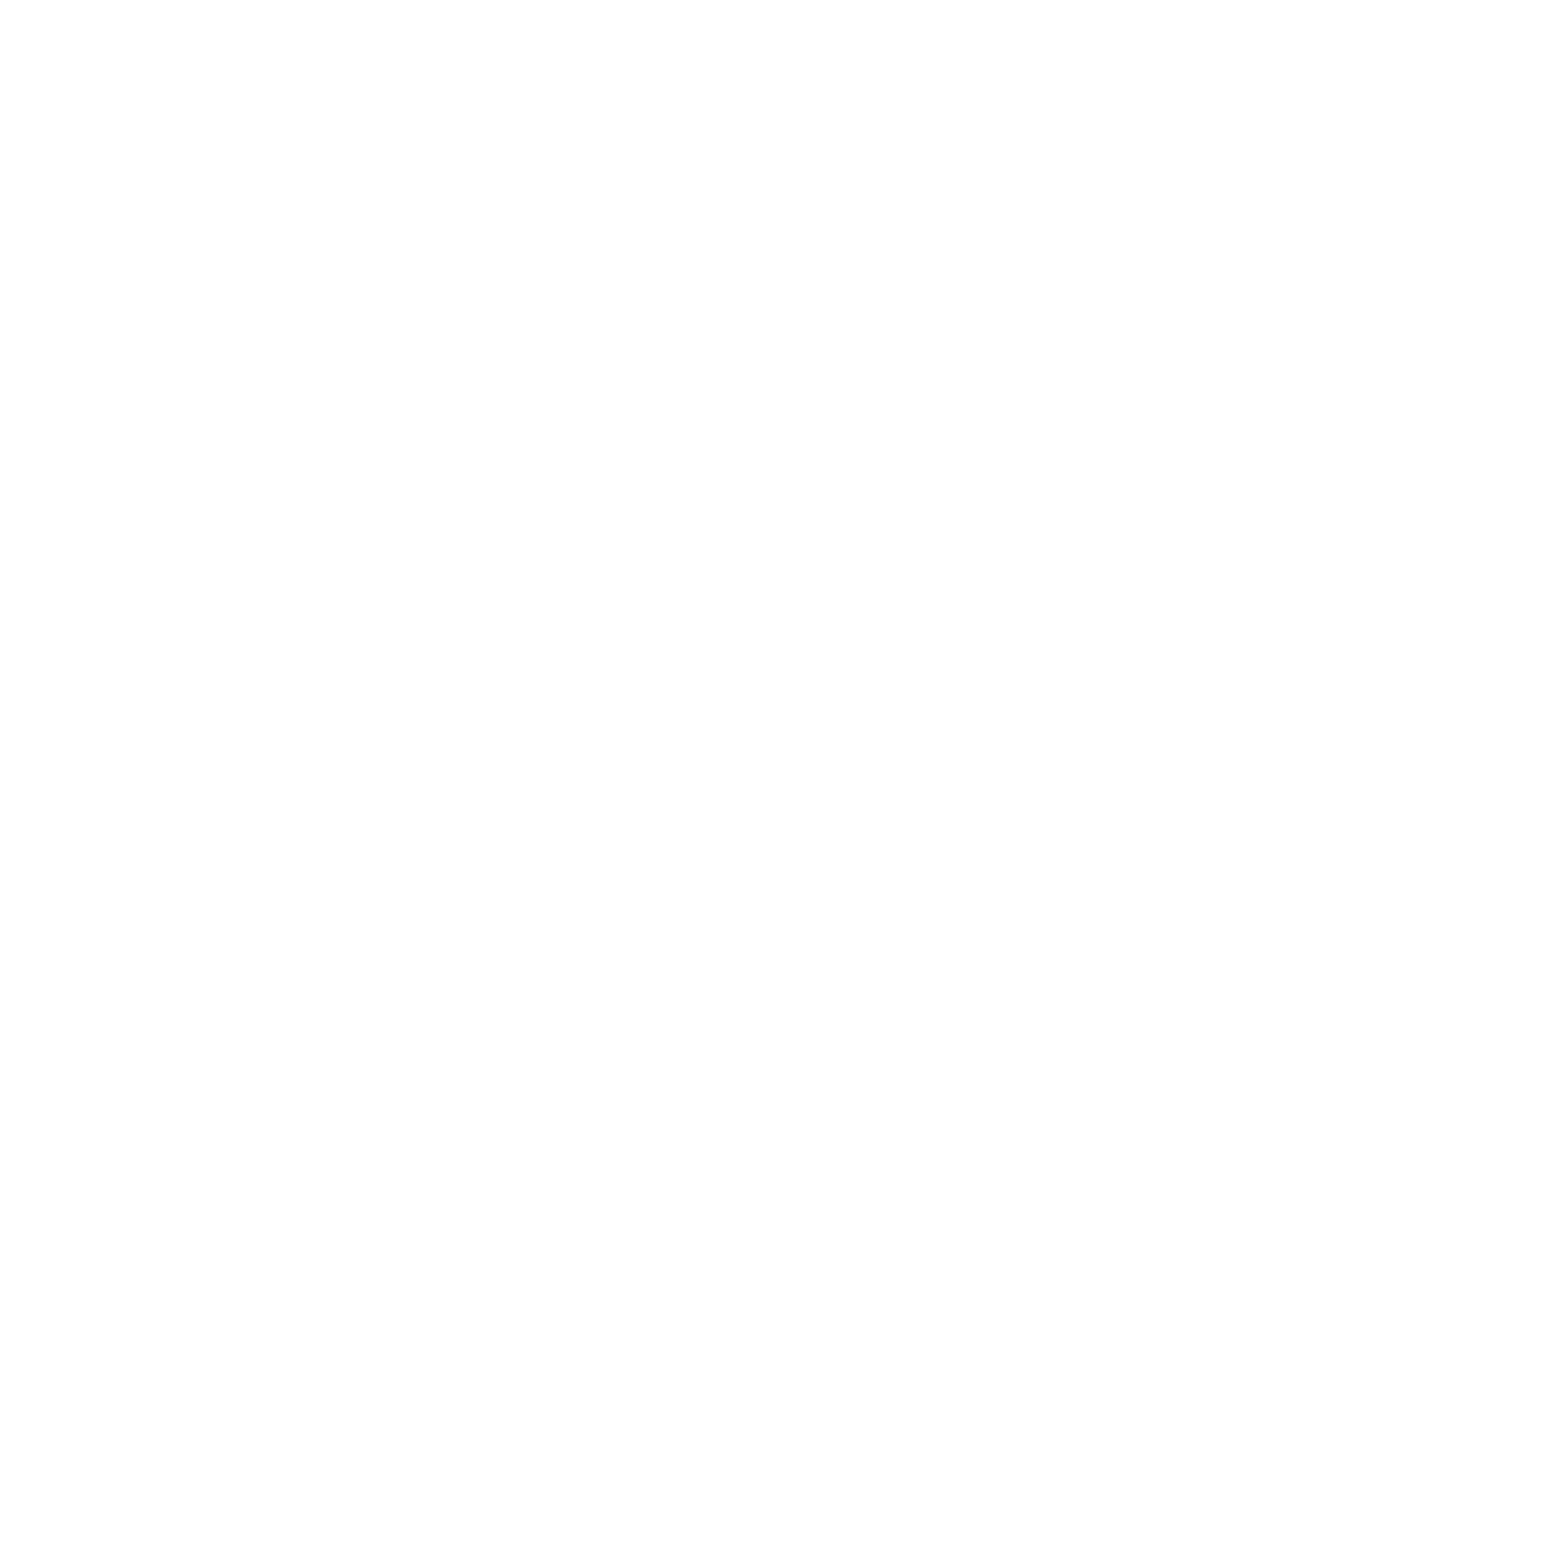 lensax-logo-coopervision.png